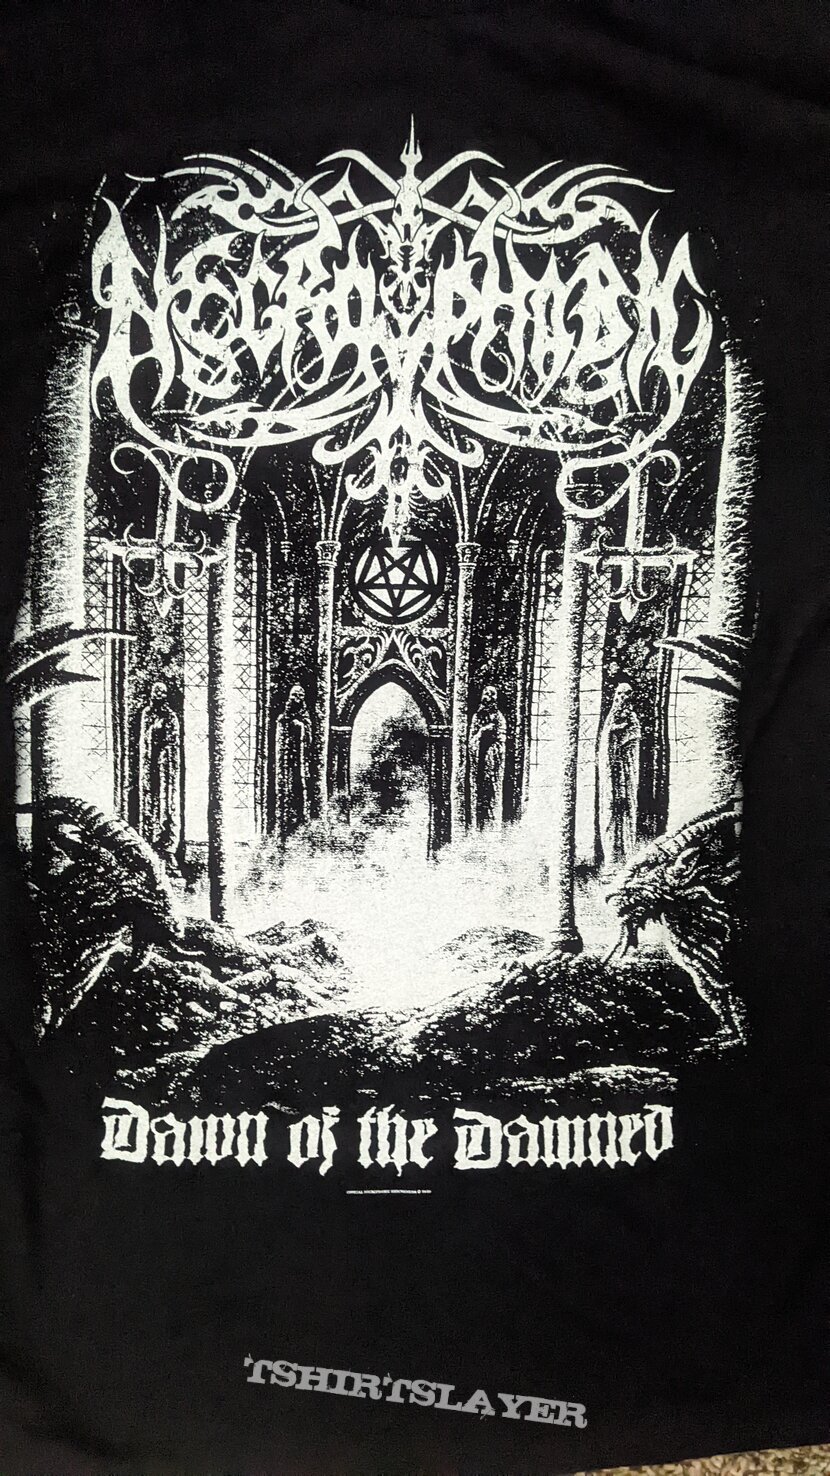 Necrophobic - Dawn of the Damned shirt